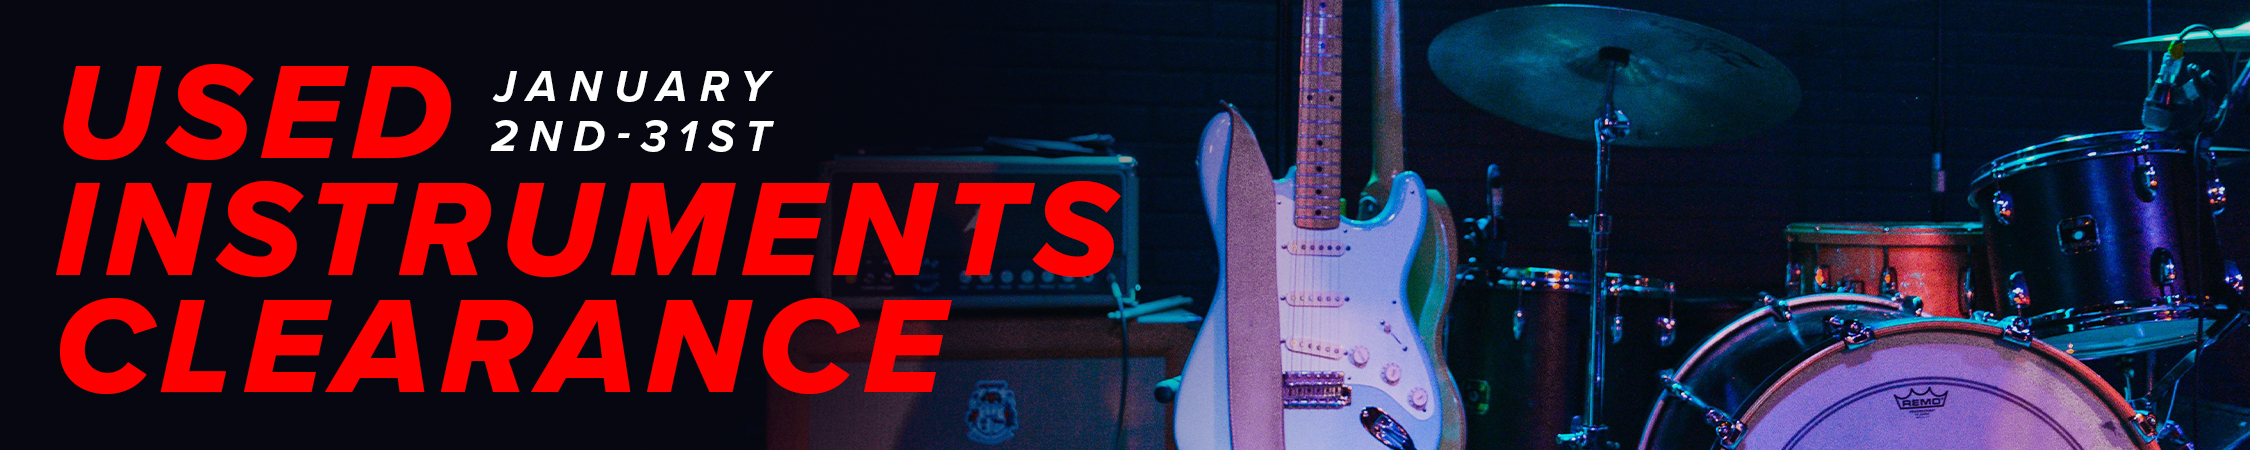 January Clearance Sale on Used Instruments!